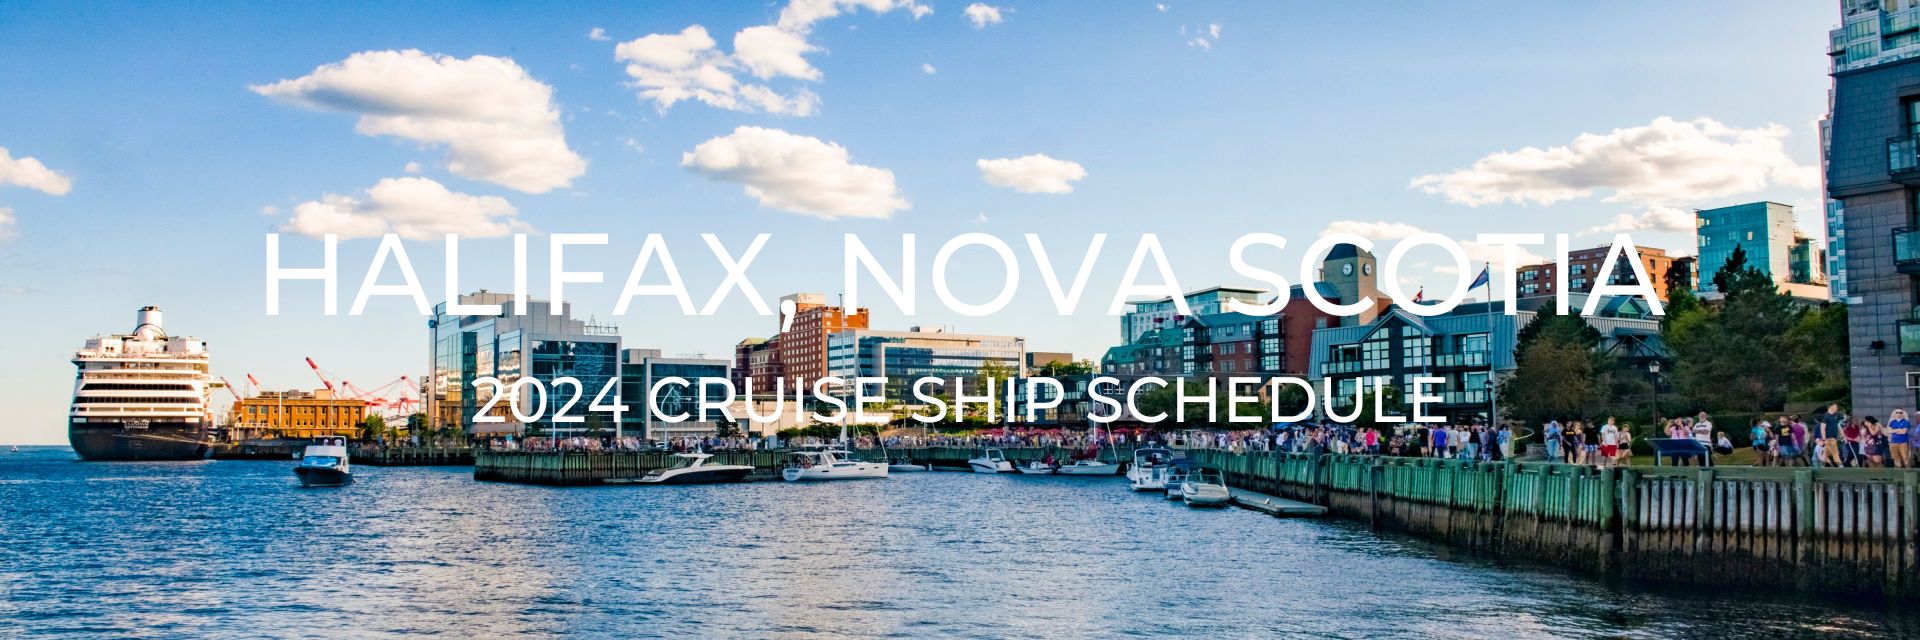 Photo of the Halifax, Nova Scotia waterfront boardwalk showing a docked cruise ship. Text on the image says "Halifax, Nova Scotia 2024 Cruise Ship Schedule". 